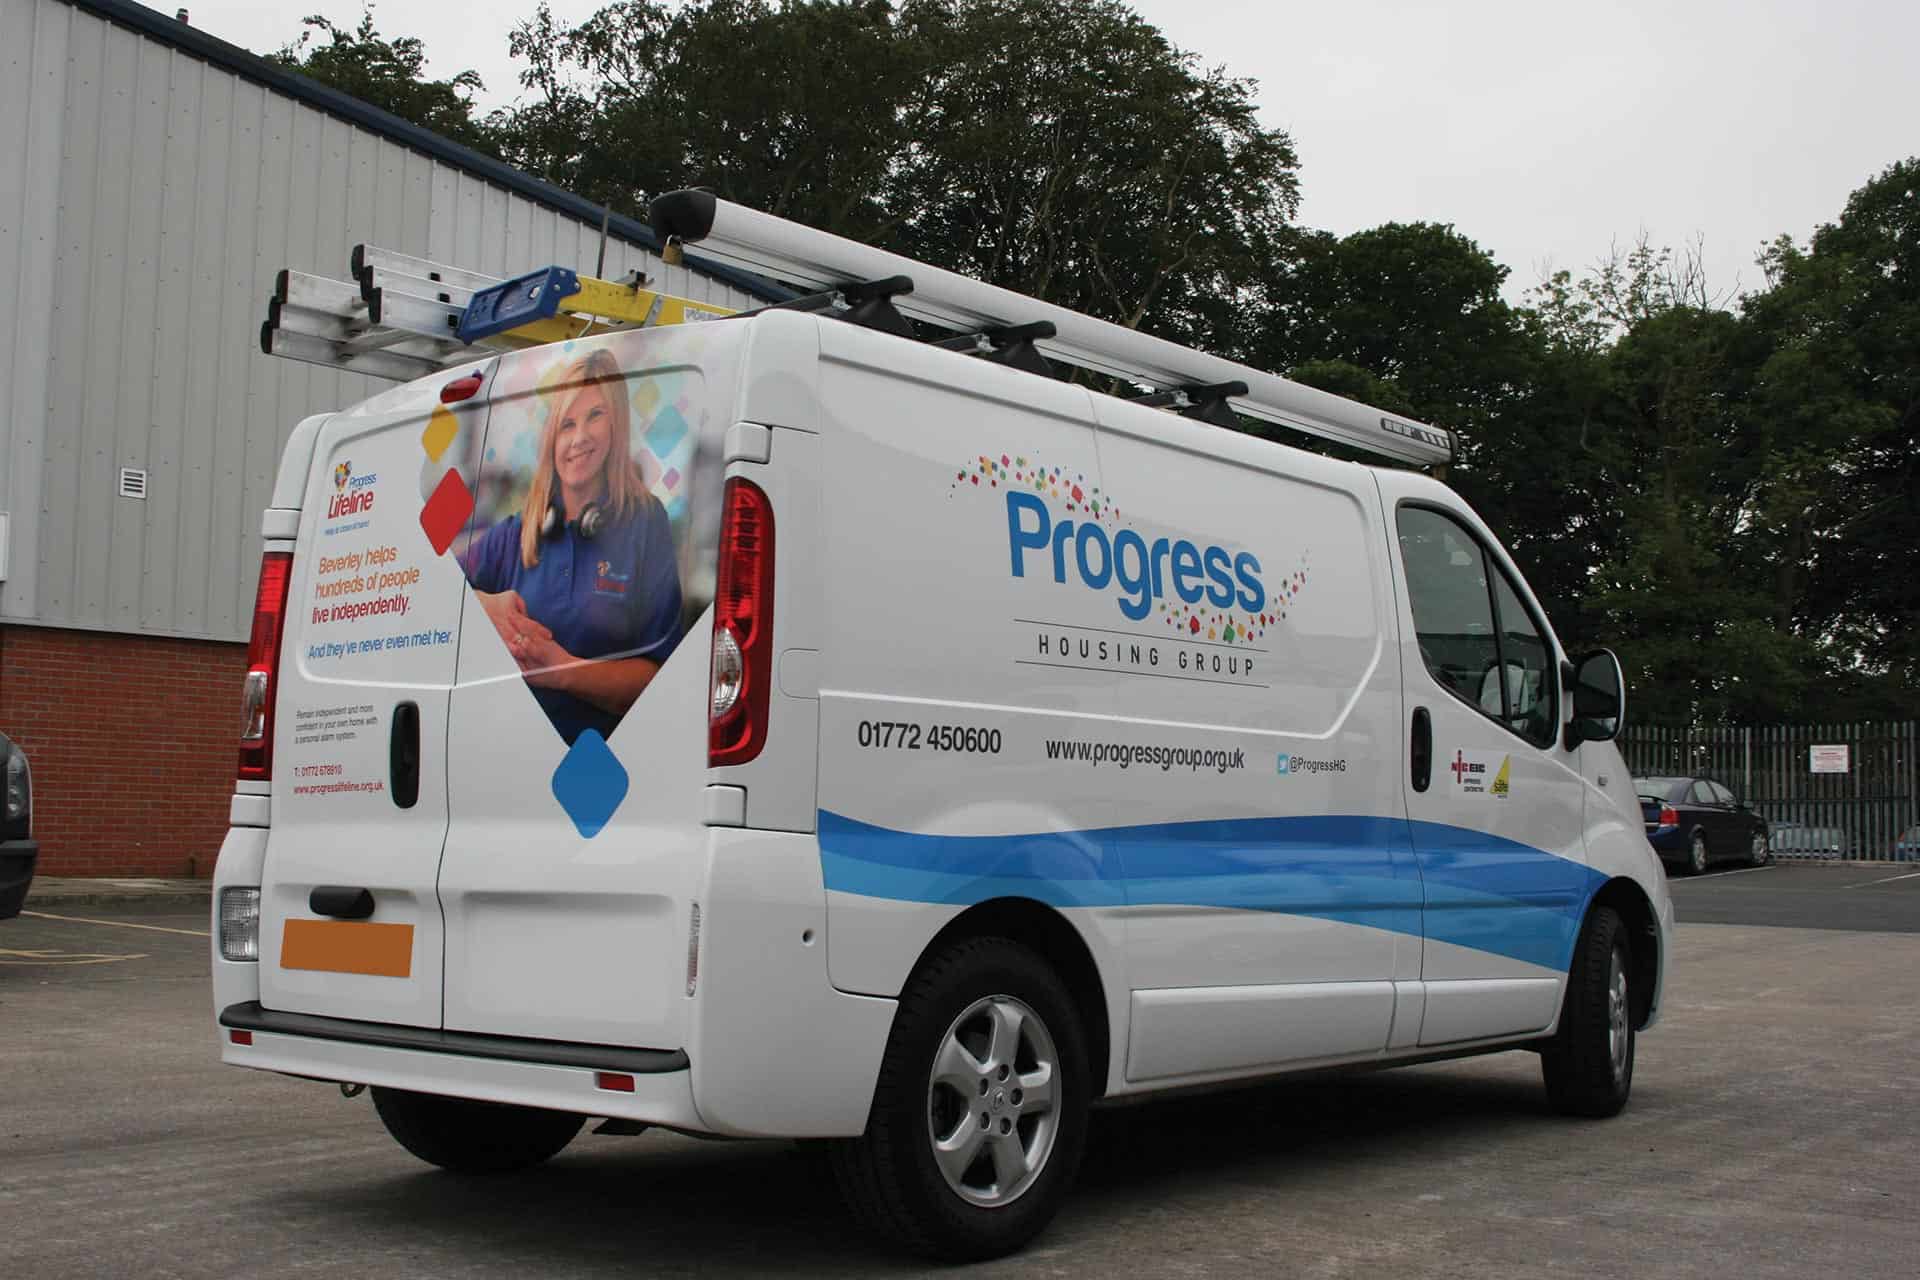 Progress Housing Group - vehicle part wrap and graphics